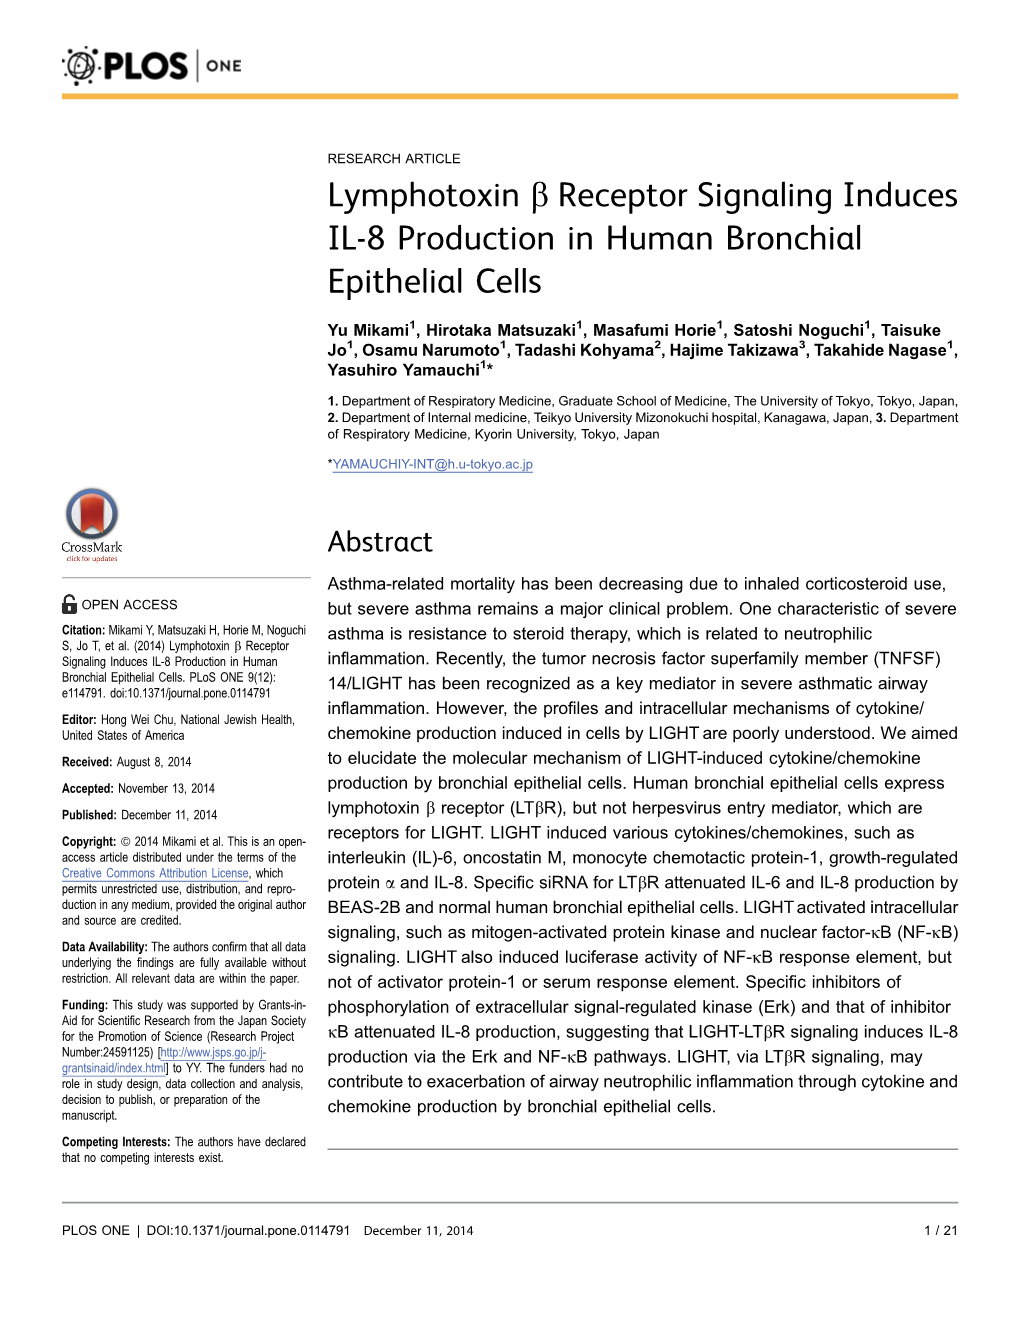 Lymphotoxin B Receptor Signaling Induces IL-8 Production in Human Bronchial Epithelial Cells